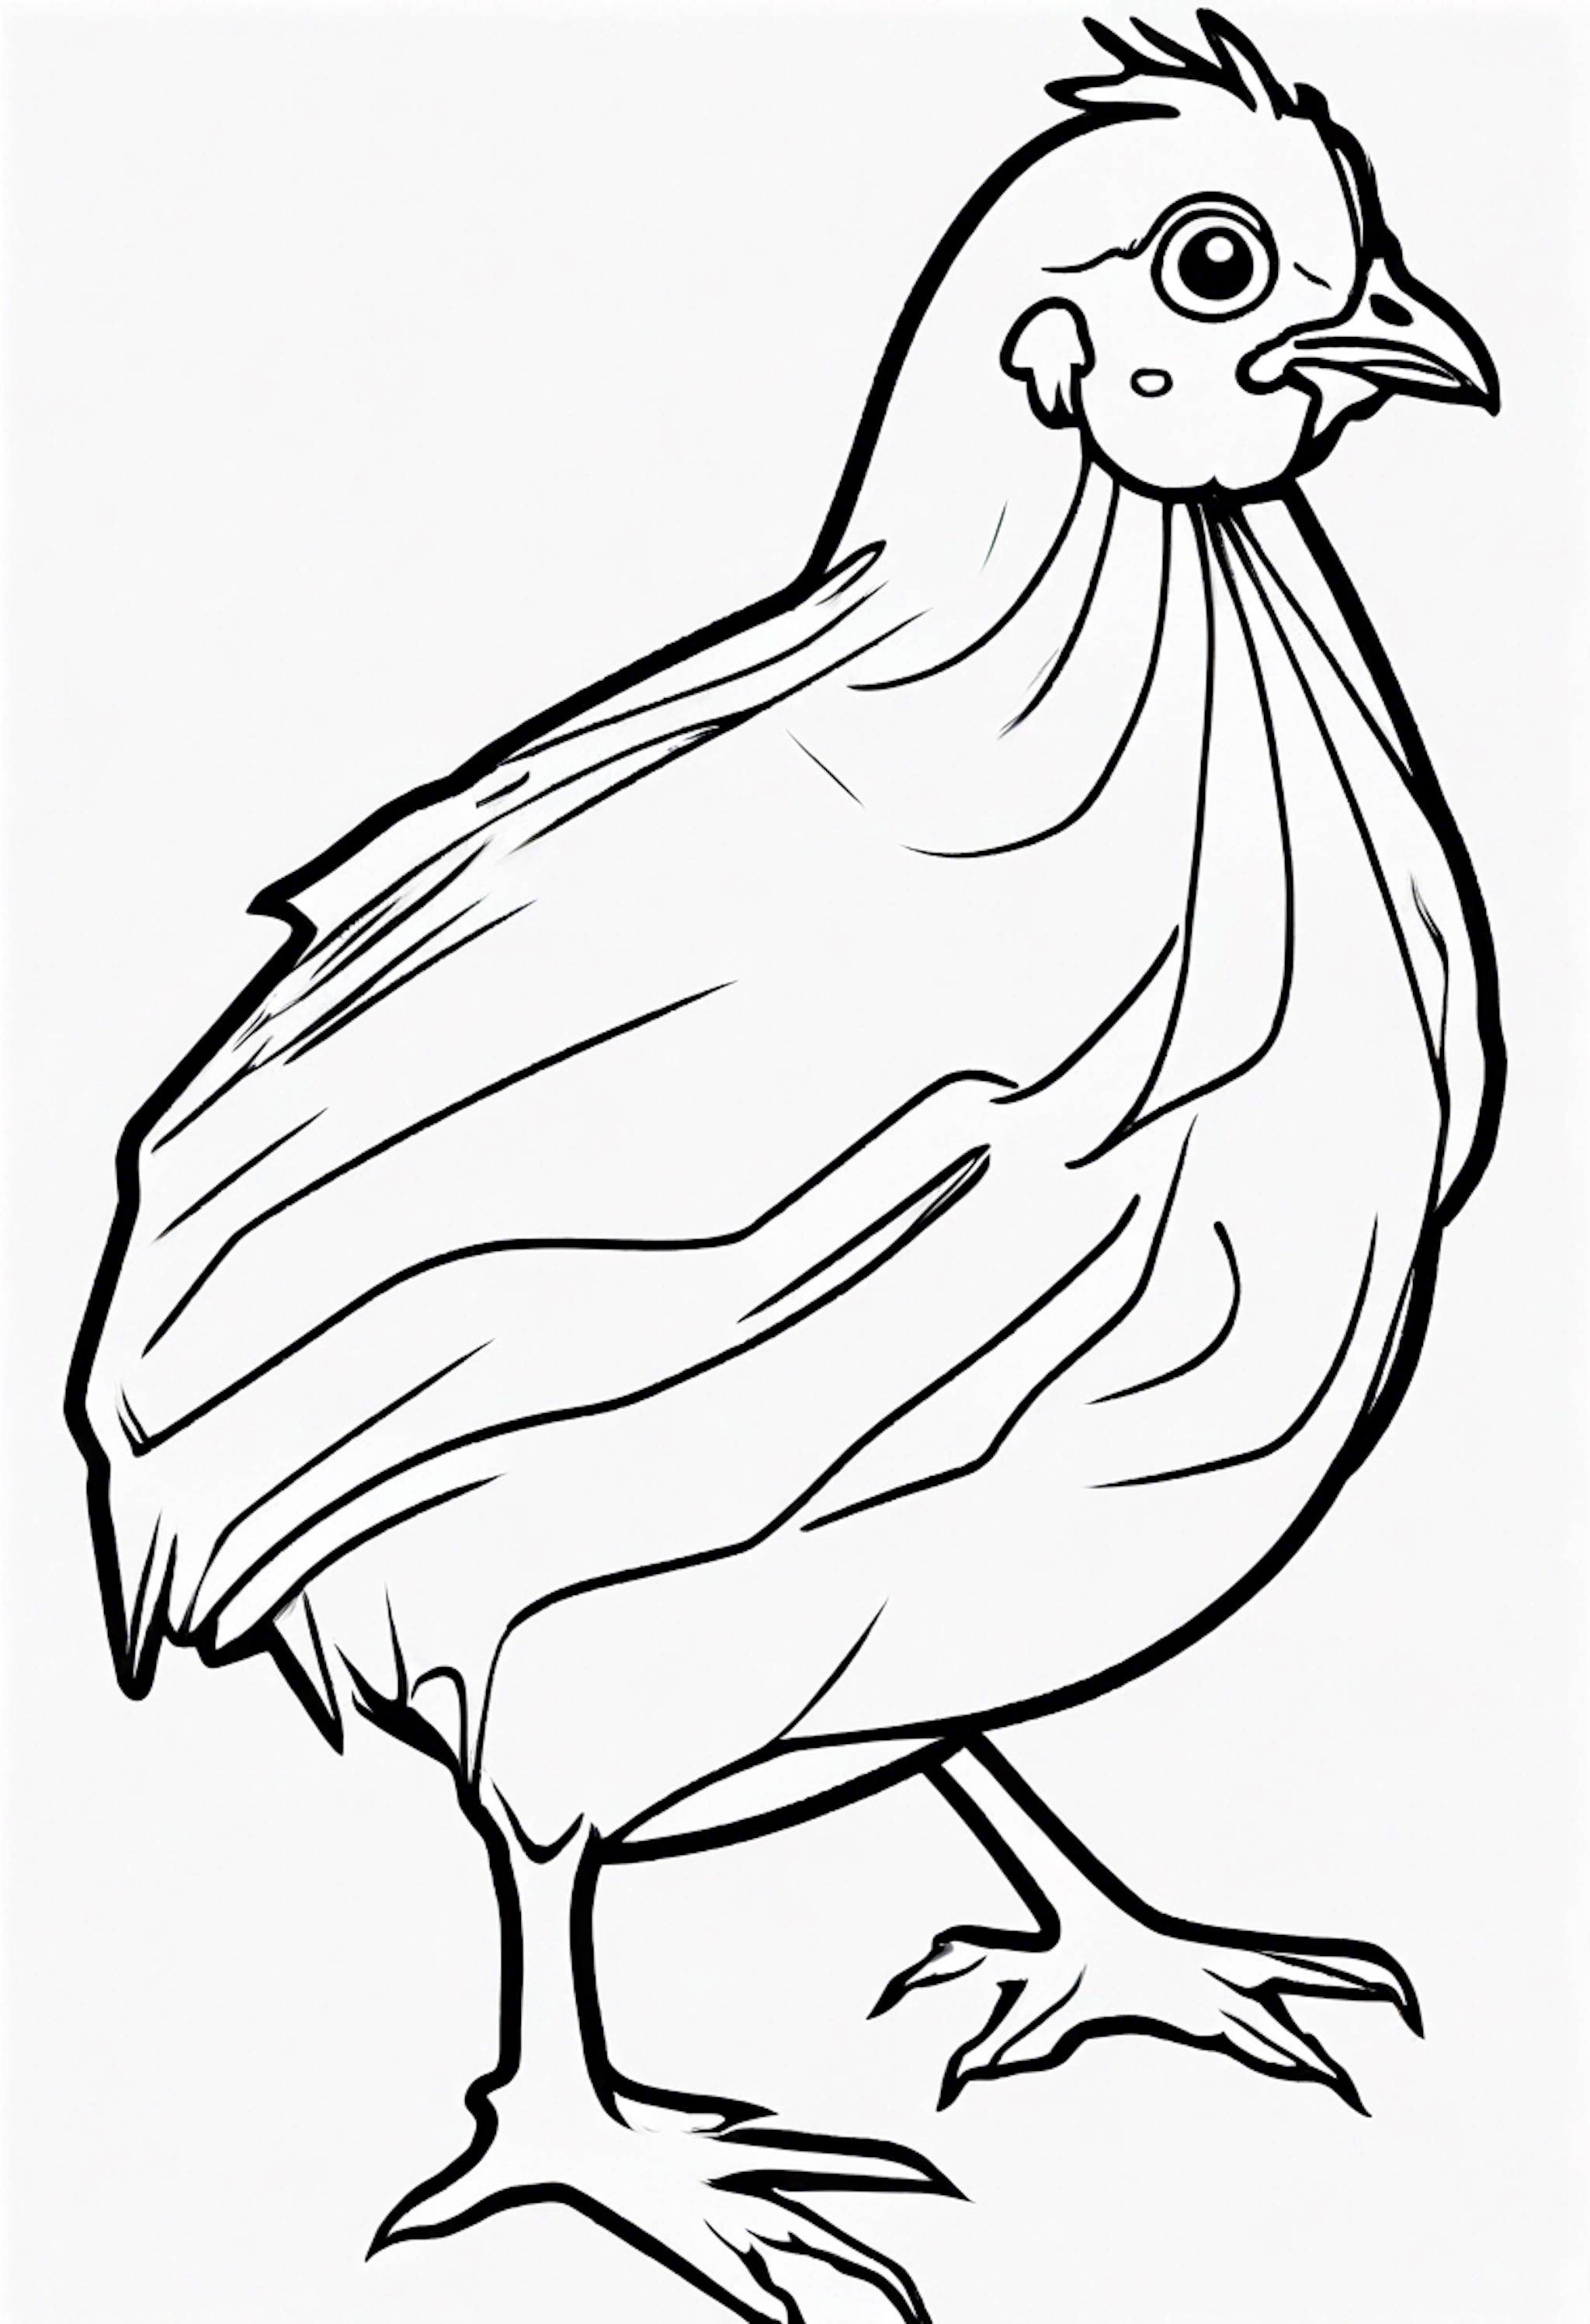 A coloring page for 1 Chick coloring pages